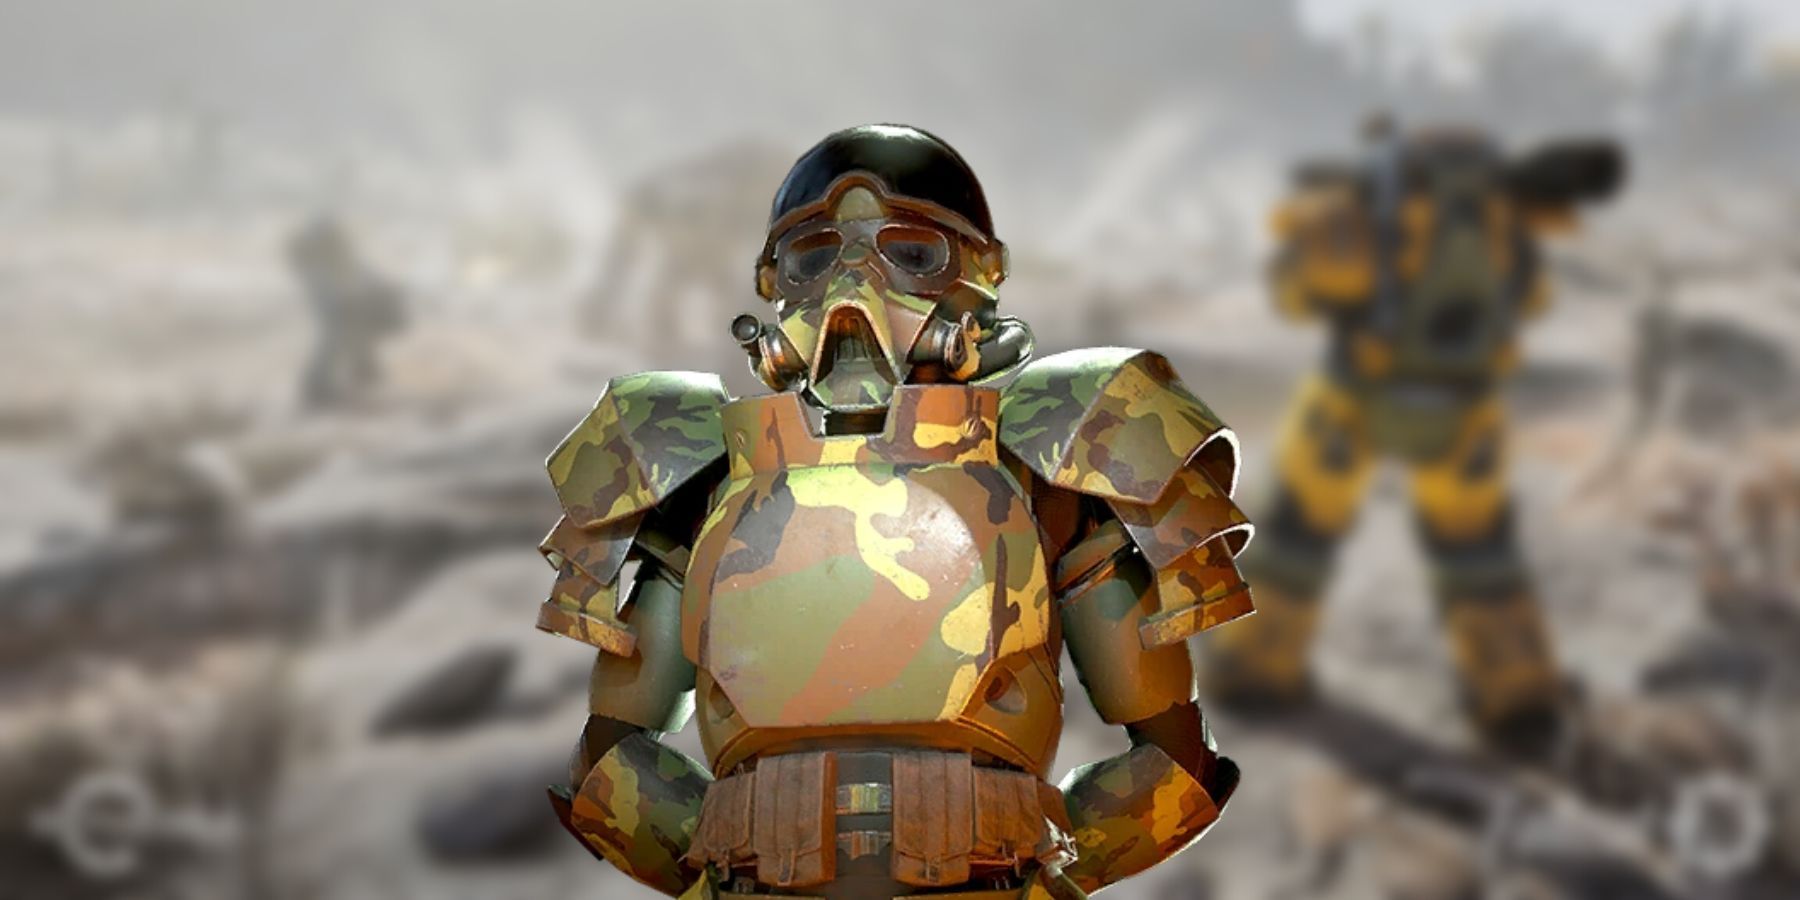 image showing the secret service armor in fallout 76.